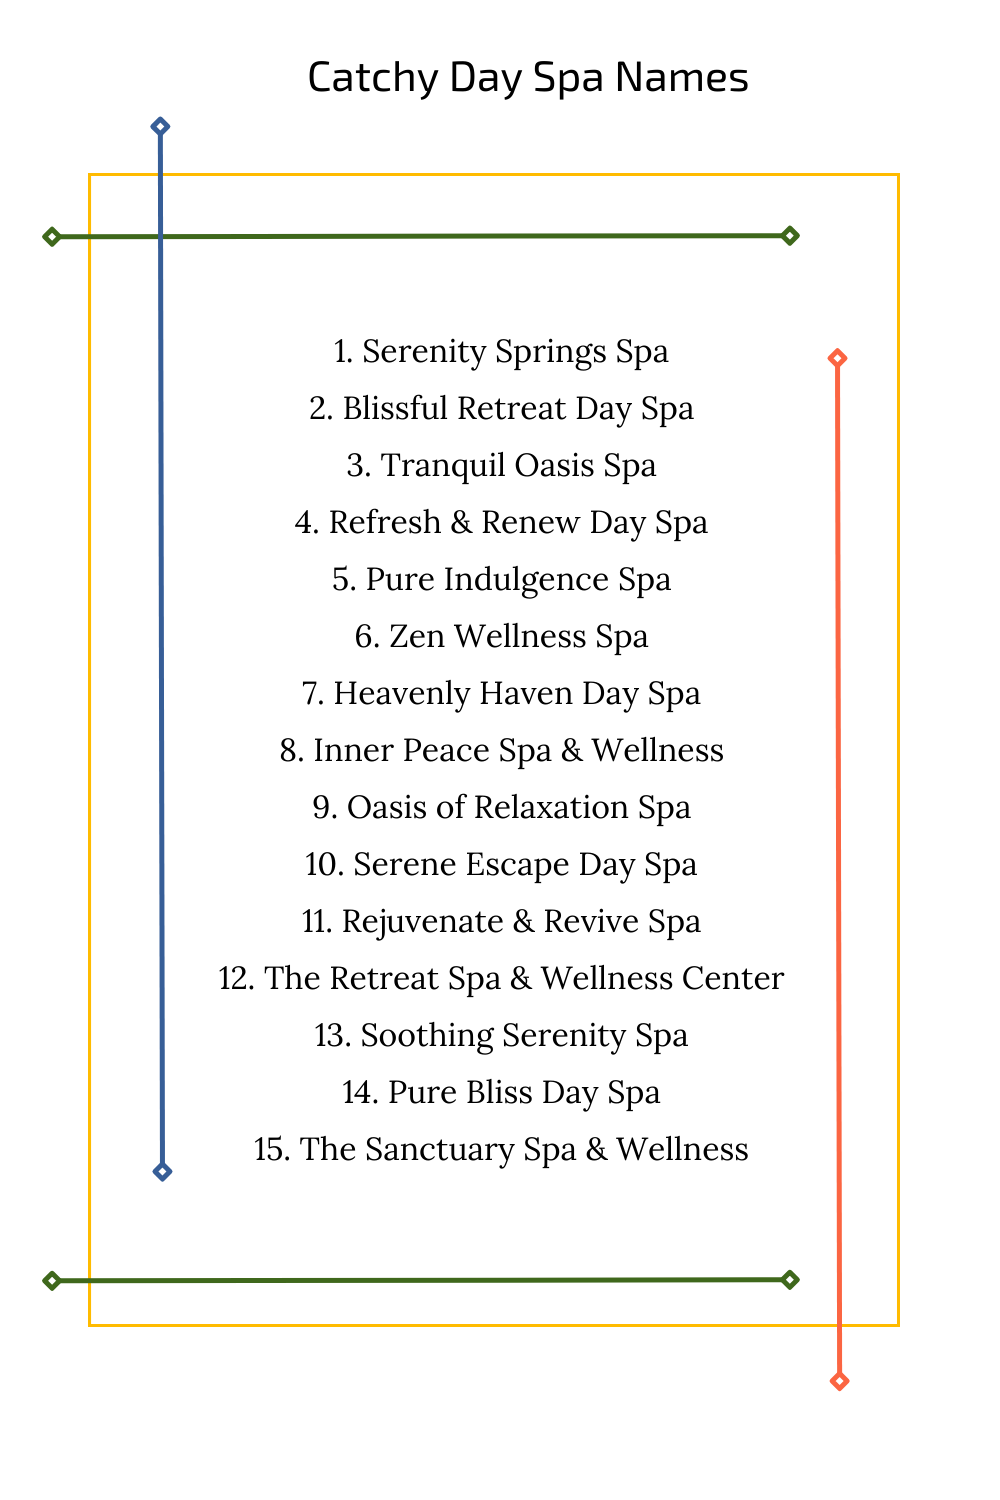 Catchy Day Spa Names